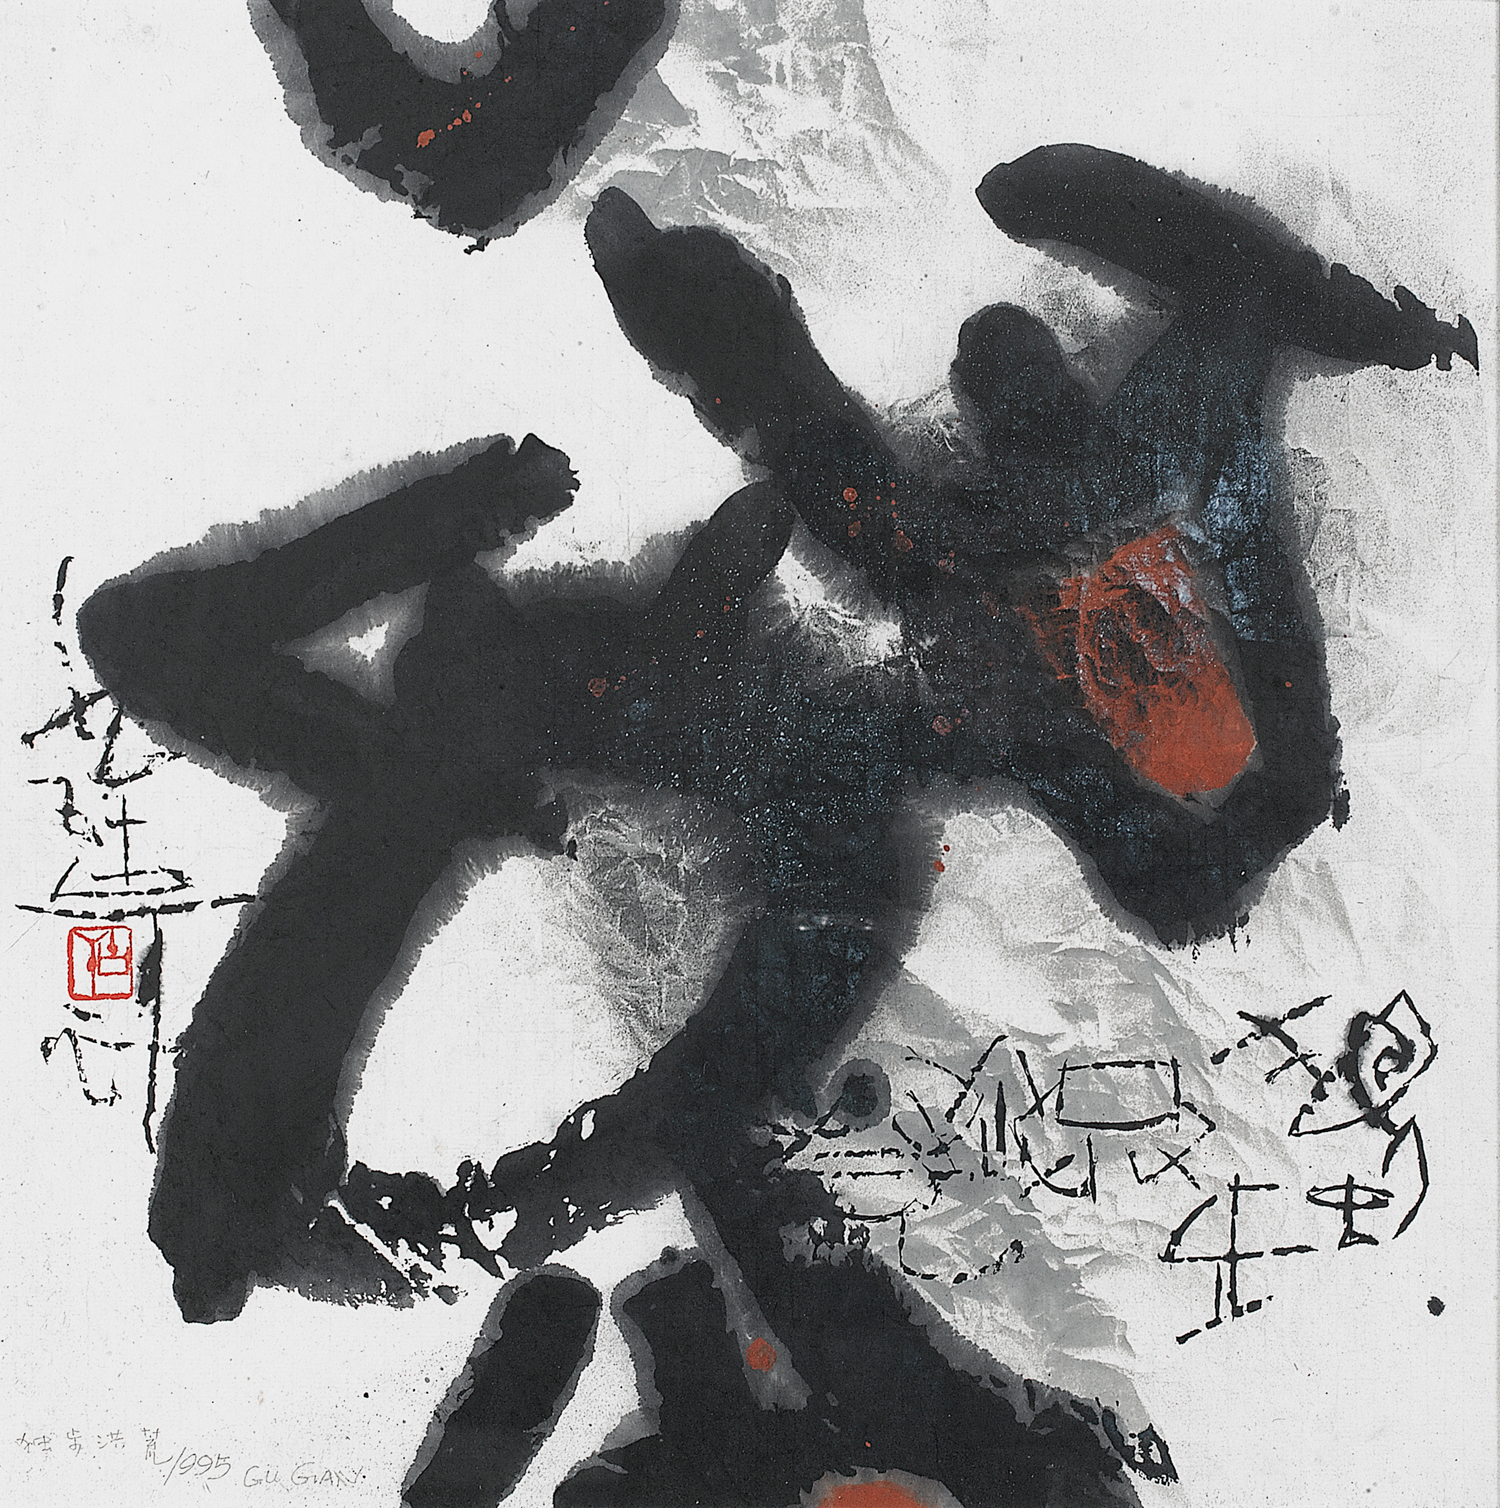 Gu Gan, Alone in the Vast Wasteland, 1995, Chinese ink & colour on rice paper, 51x51cm